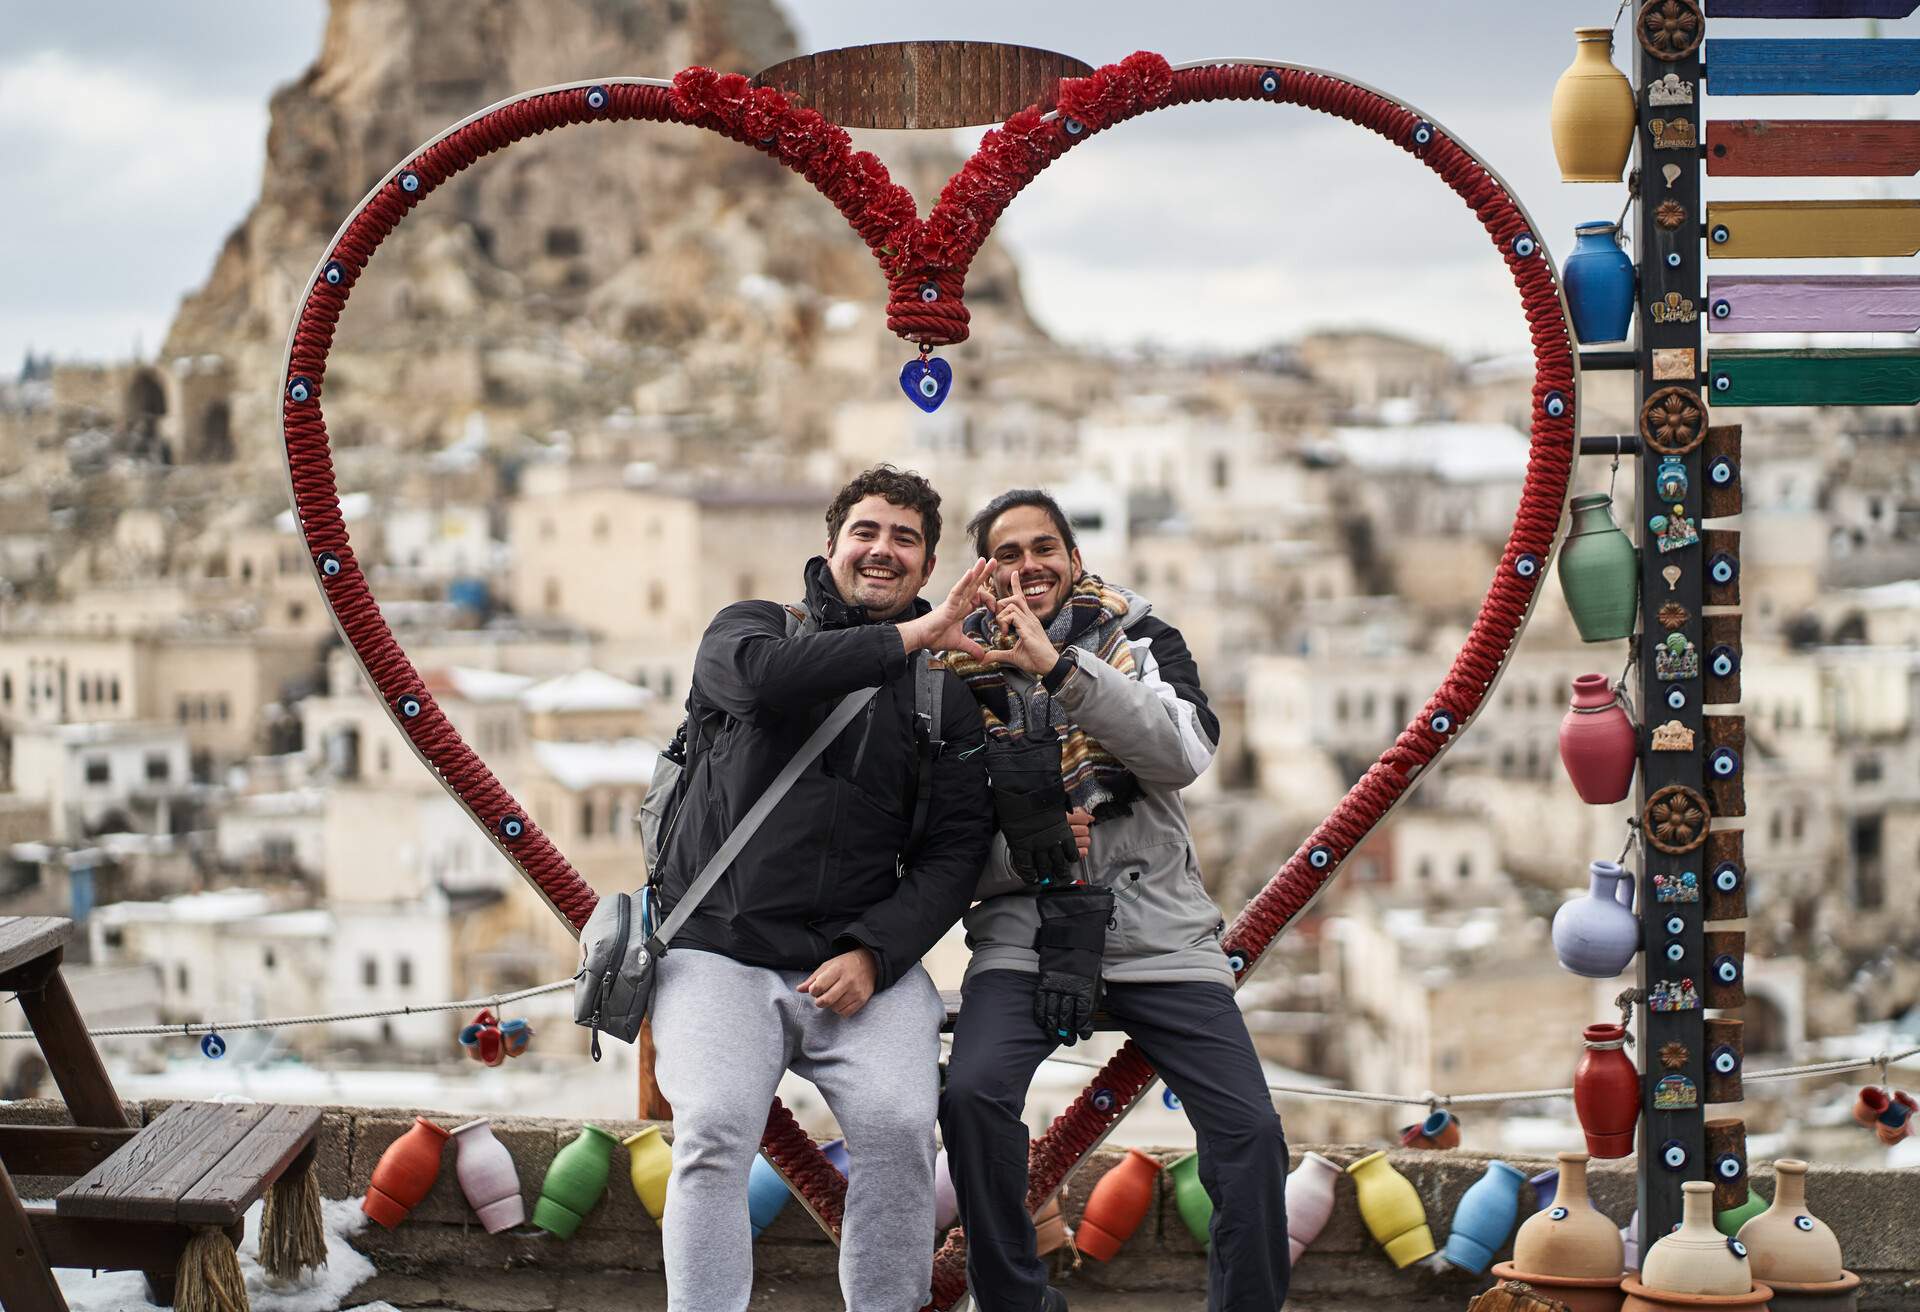 Cheerful boyfriends in outerwear smiling and gesturing heart while sitting on bench near colorful ceramic vases on blurred background of Ortahisar castle in Cappadocia, Turkey